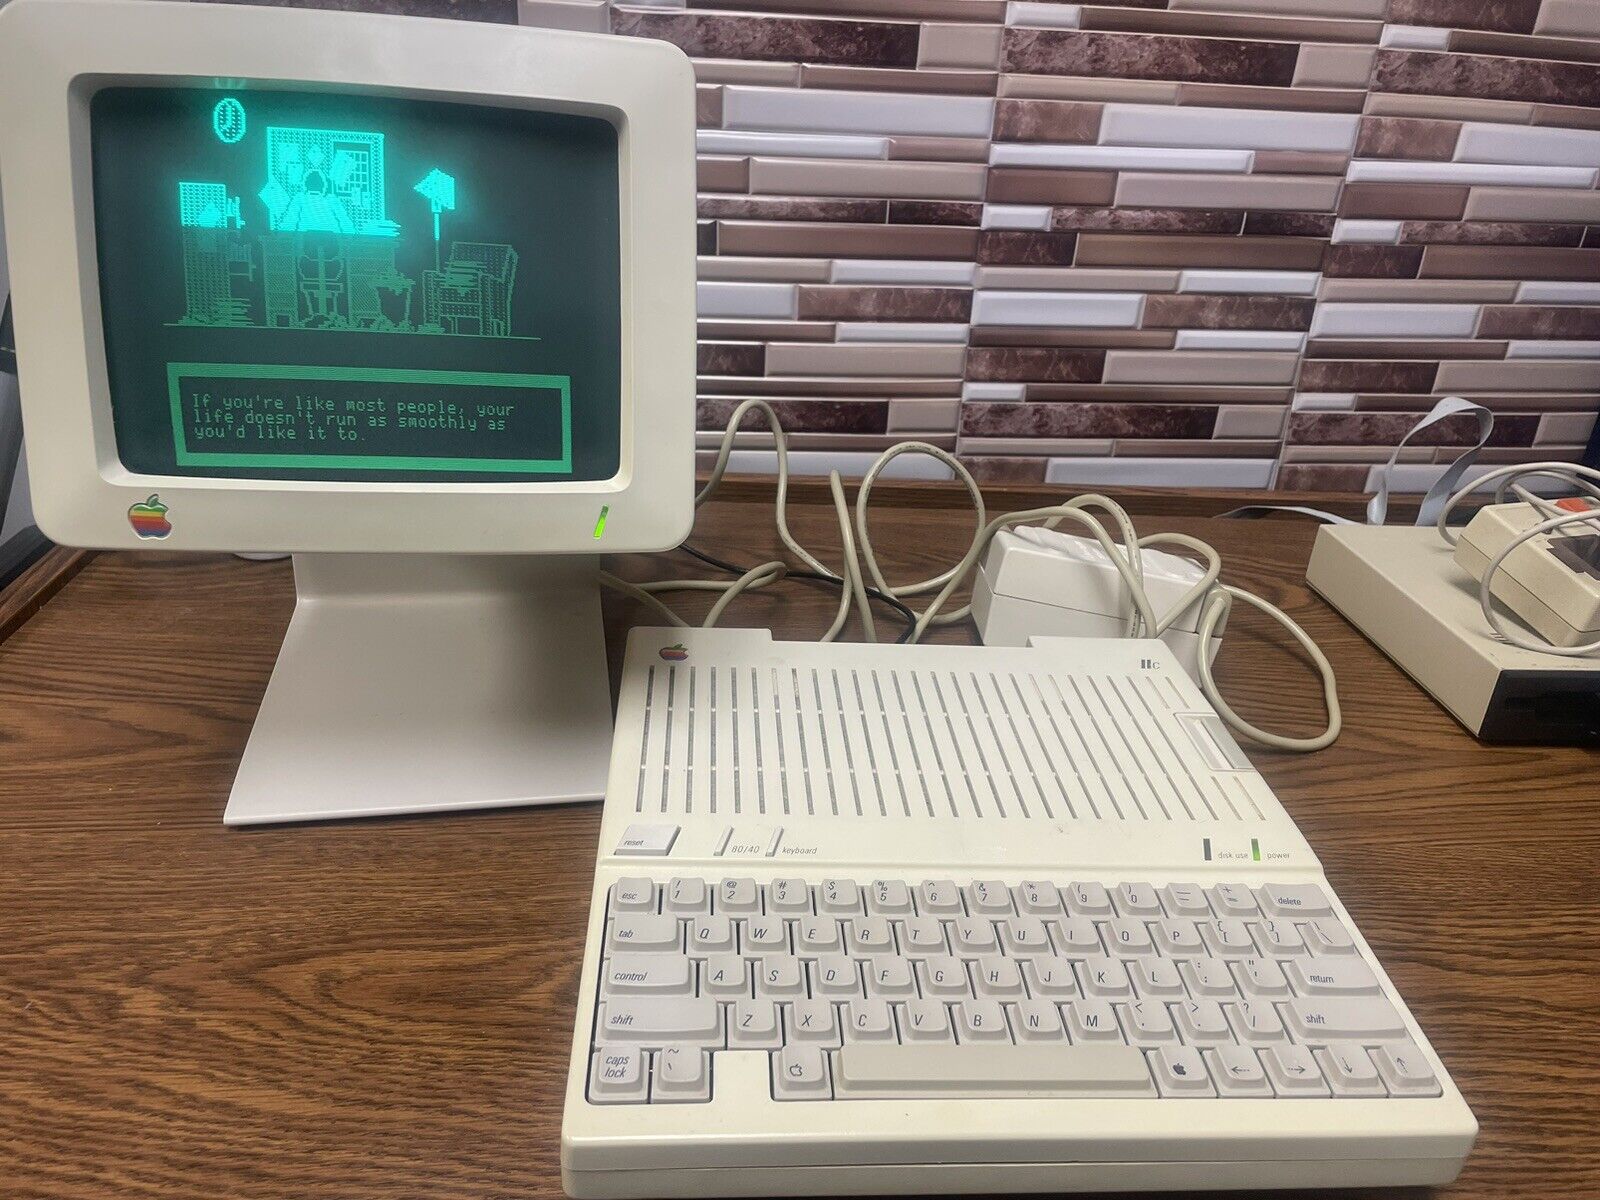 Apple llc A2S4000 Vintage Computer + Monitor Stand, Joystick & Accessories